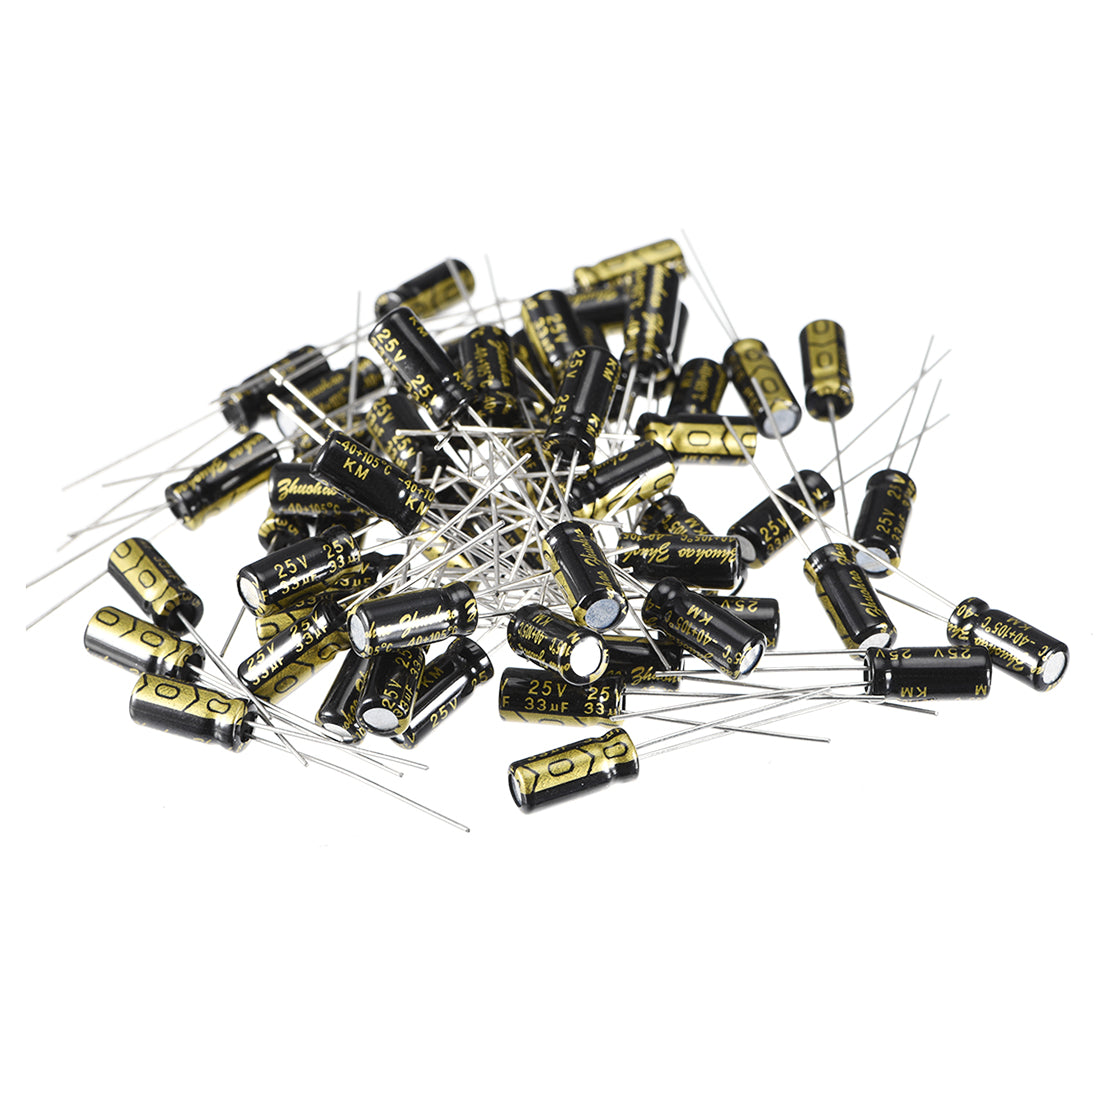 uxcell Uxcell Aluminum Radial Electrolytic Capacitor with 33uF 25V 105 Celsius Life 2000H 5 x 11 mm Black 50pcs